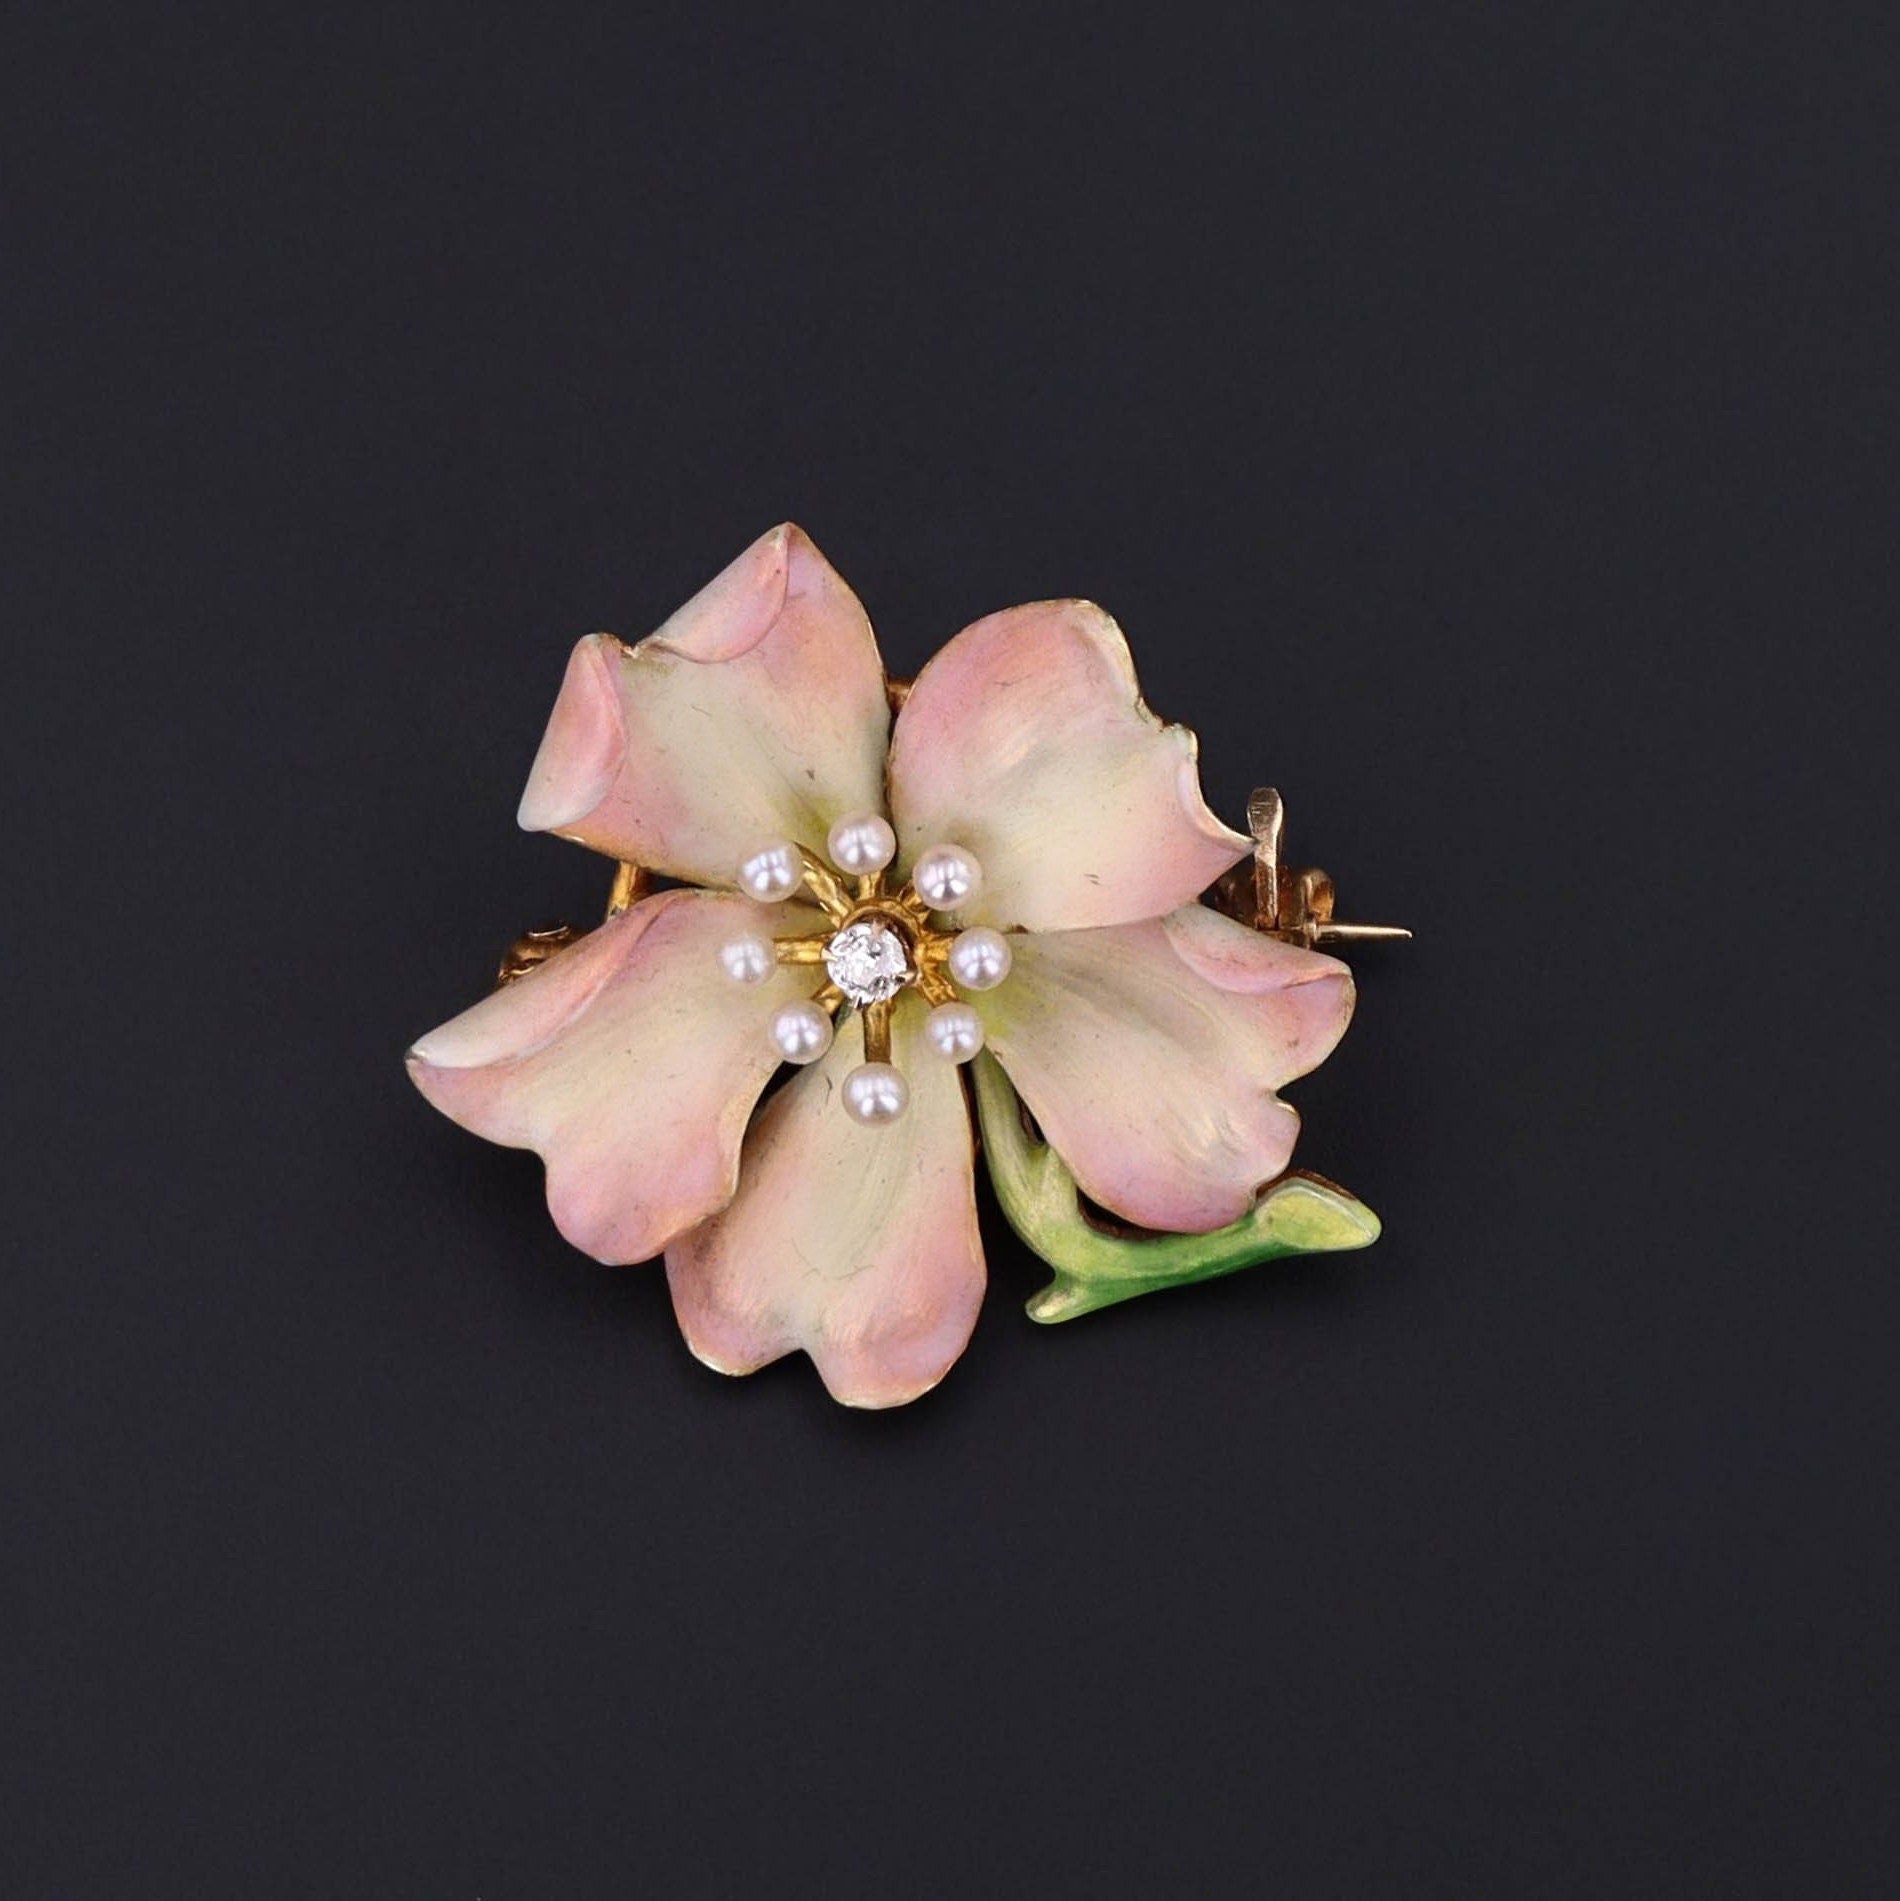 Antique Enamel Brooch of 14k Gold by Bippart and Co